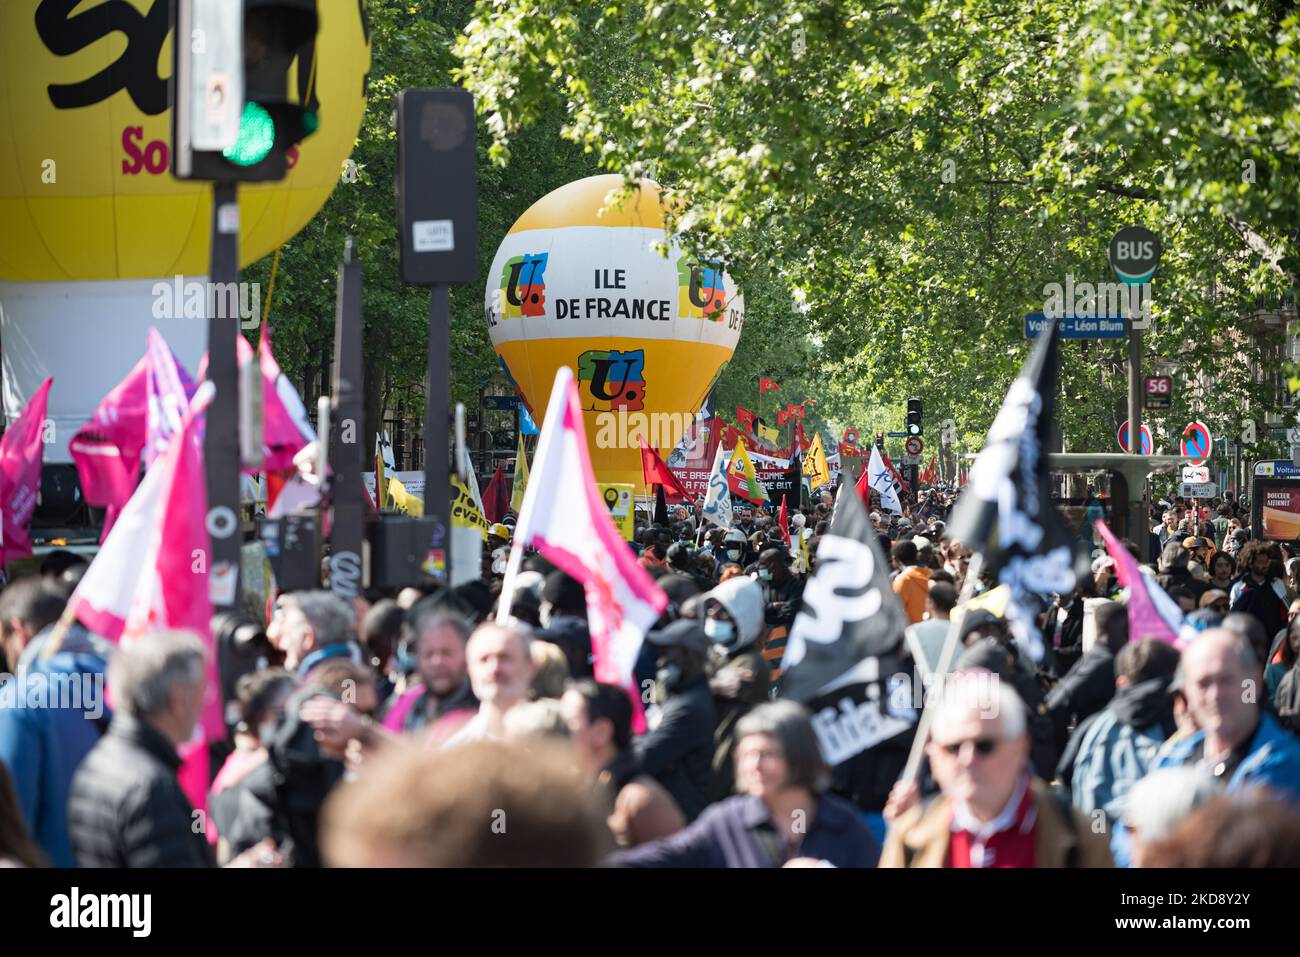 Several thousand demonstrators waving union and political party flags participated in the traditional May Day demonstration in Paris (Labor Day) marking International Workers Day, starting at Place de la République in Paris, May 1, 2022. (Photo by Samuel Boivin/NurPhoto) Stock Photo